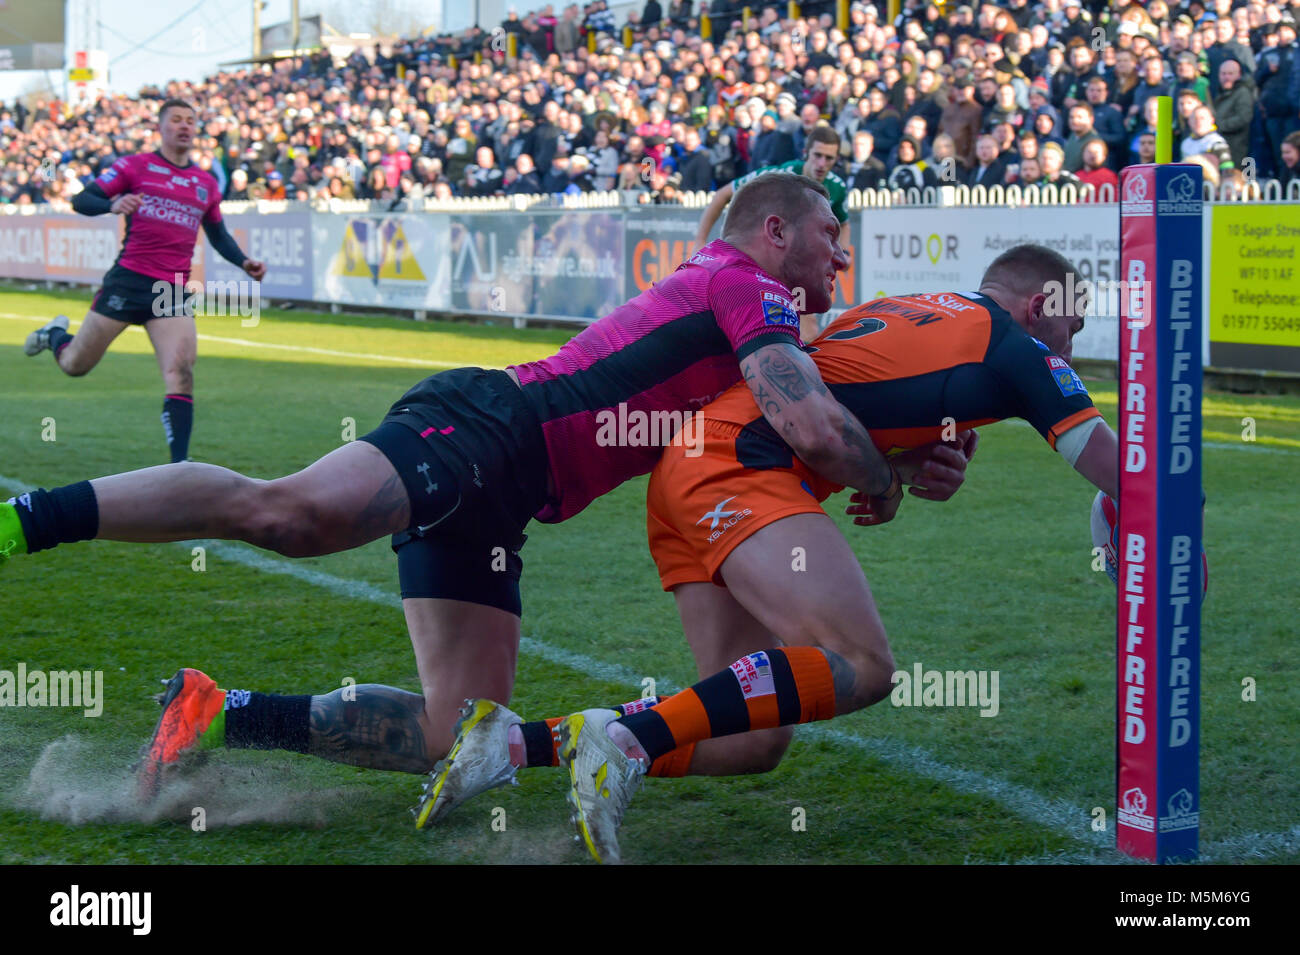 24th February 2018 , Mend-A-Hose Jungle, Castleford, England; Betfred Super League rugby, Castleford Tigers versus Hull FC; Greg Minikin goes to score a try tackled by Hull FC's Josh Griffin Stock Photo